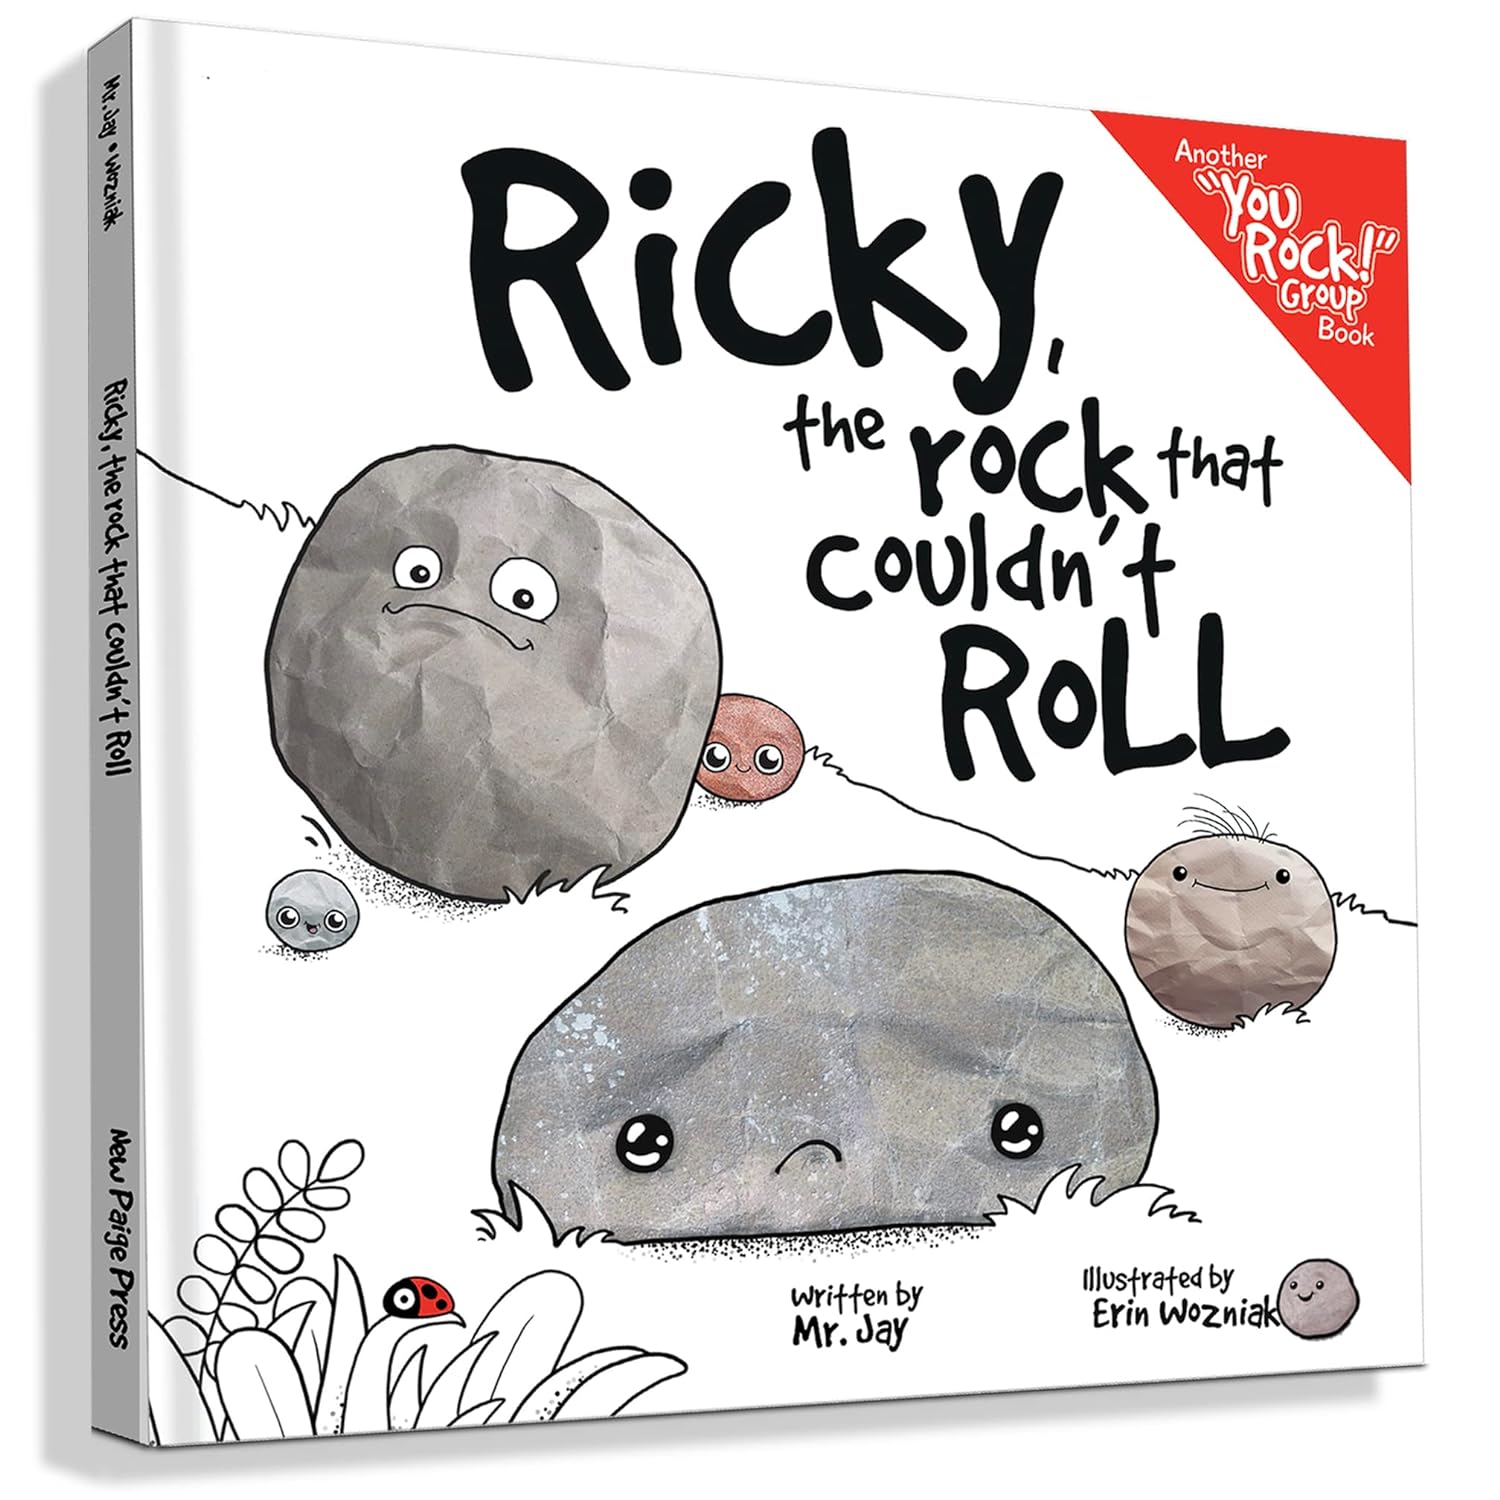 Ricky, the Rock That Couldn't Roll by Mr. Jay